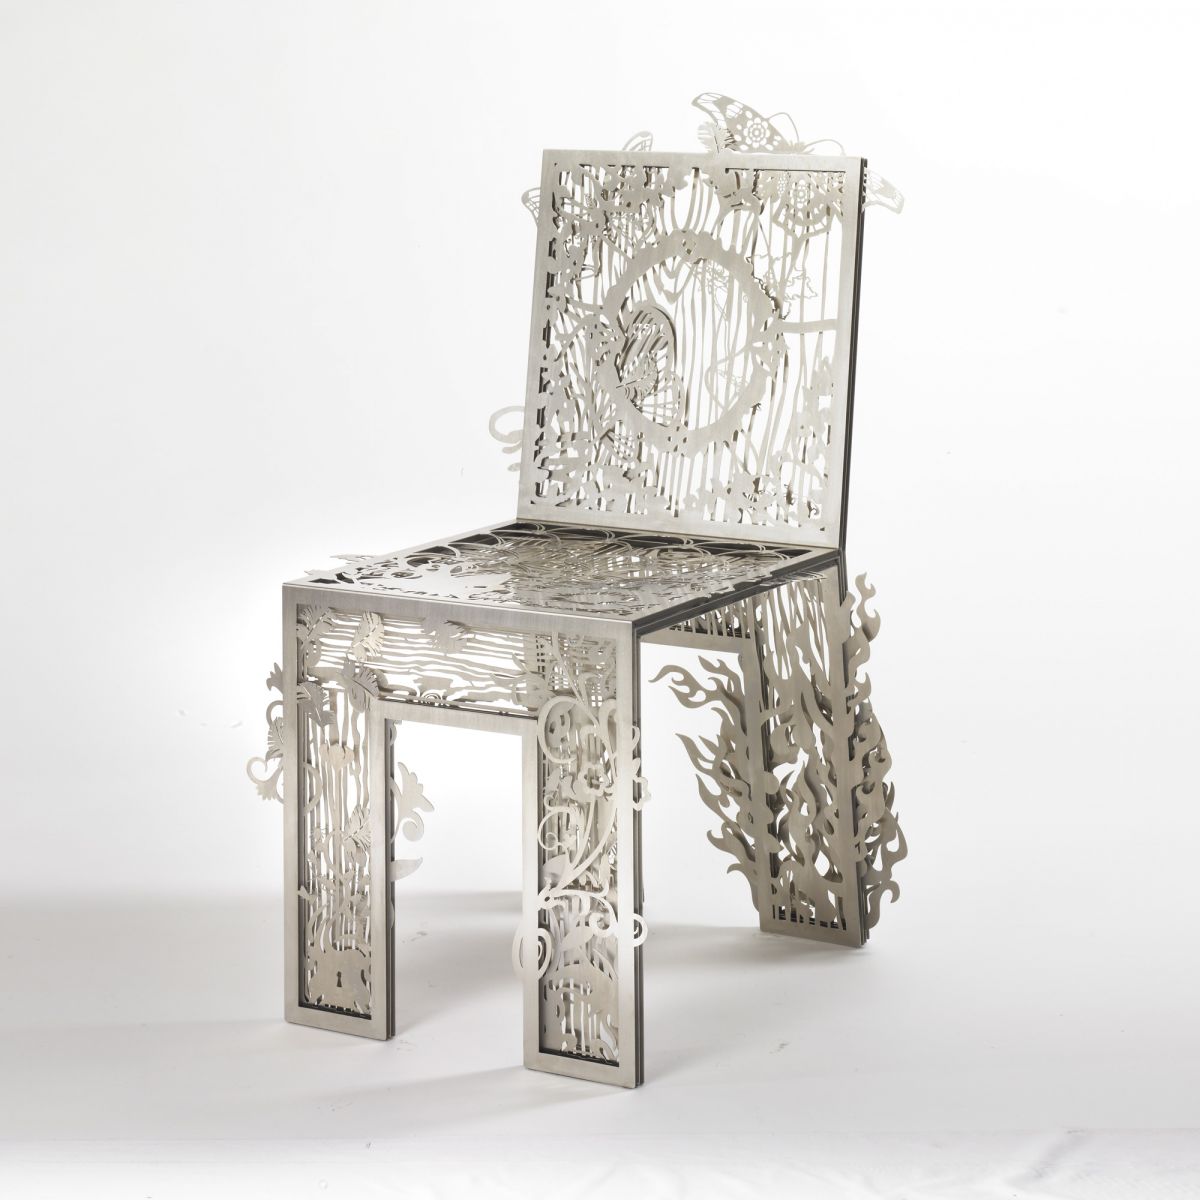 Sculpture chair 'Tjep' Other contemporary designers  pic-1